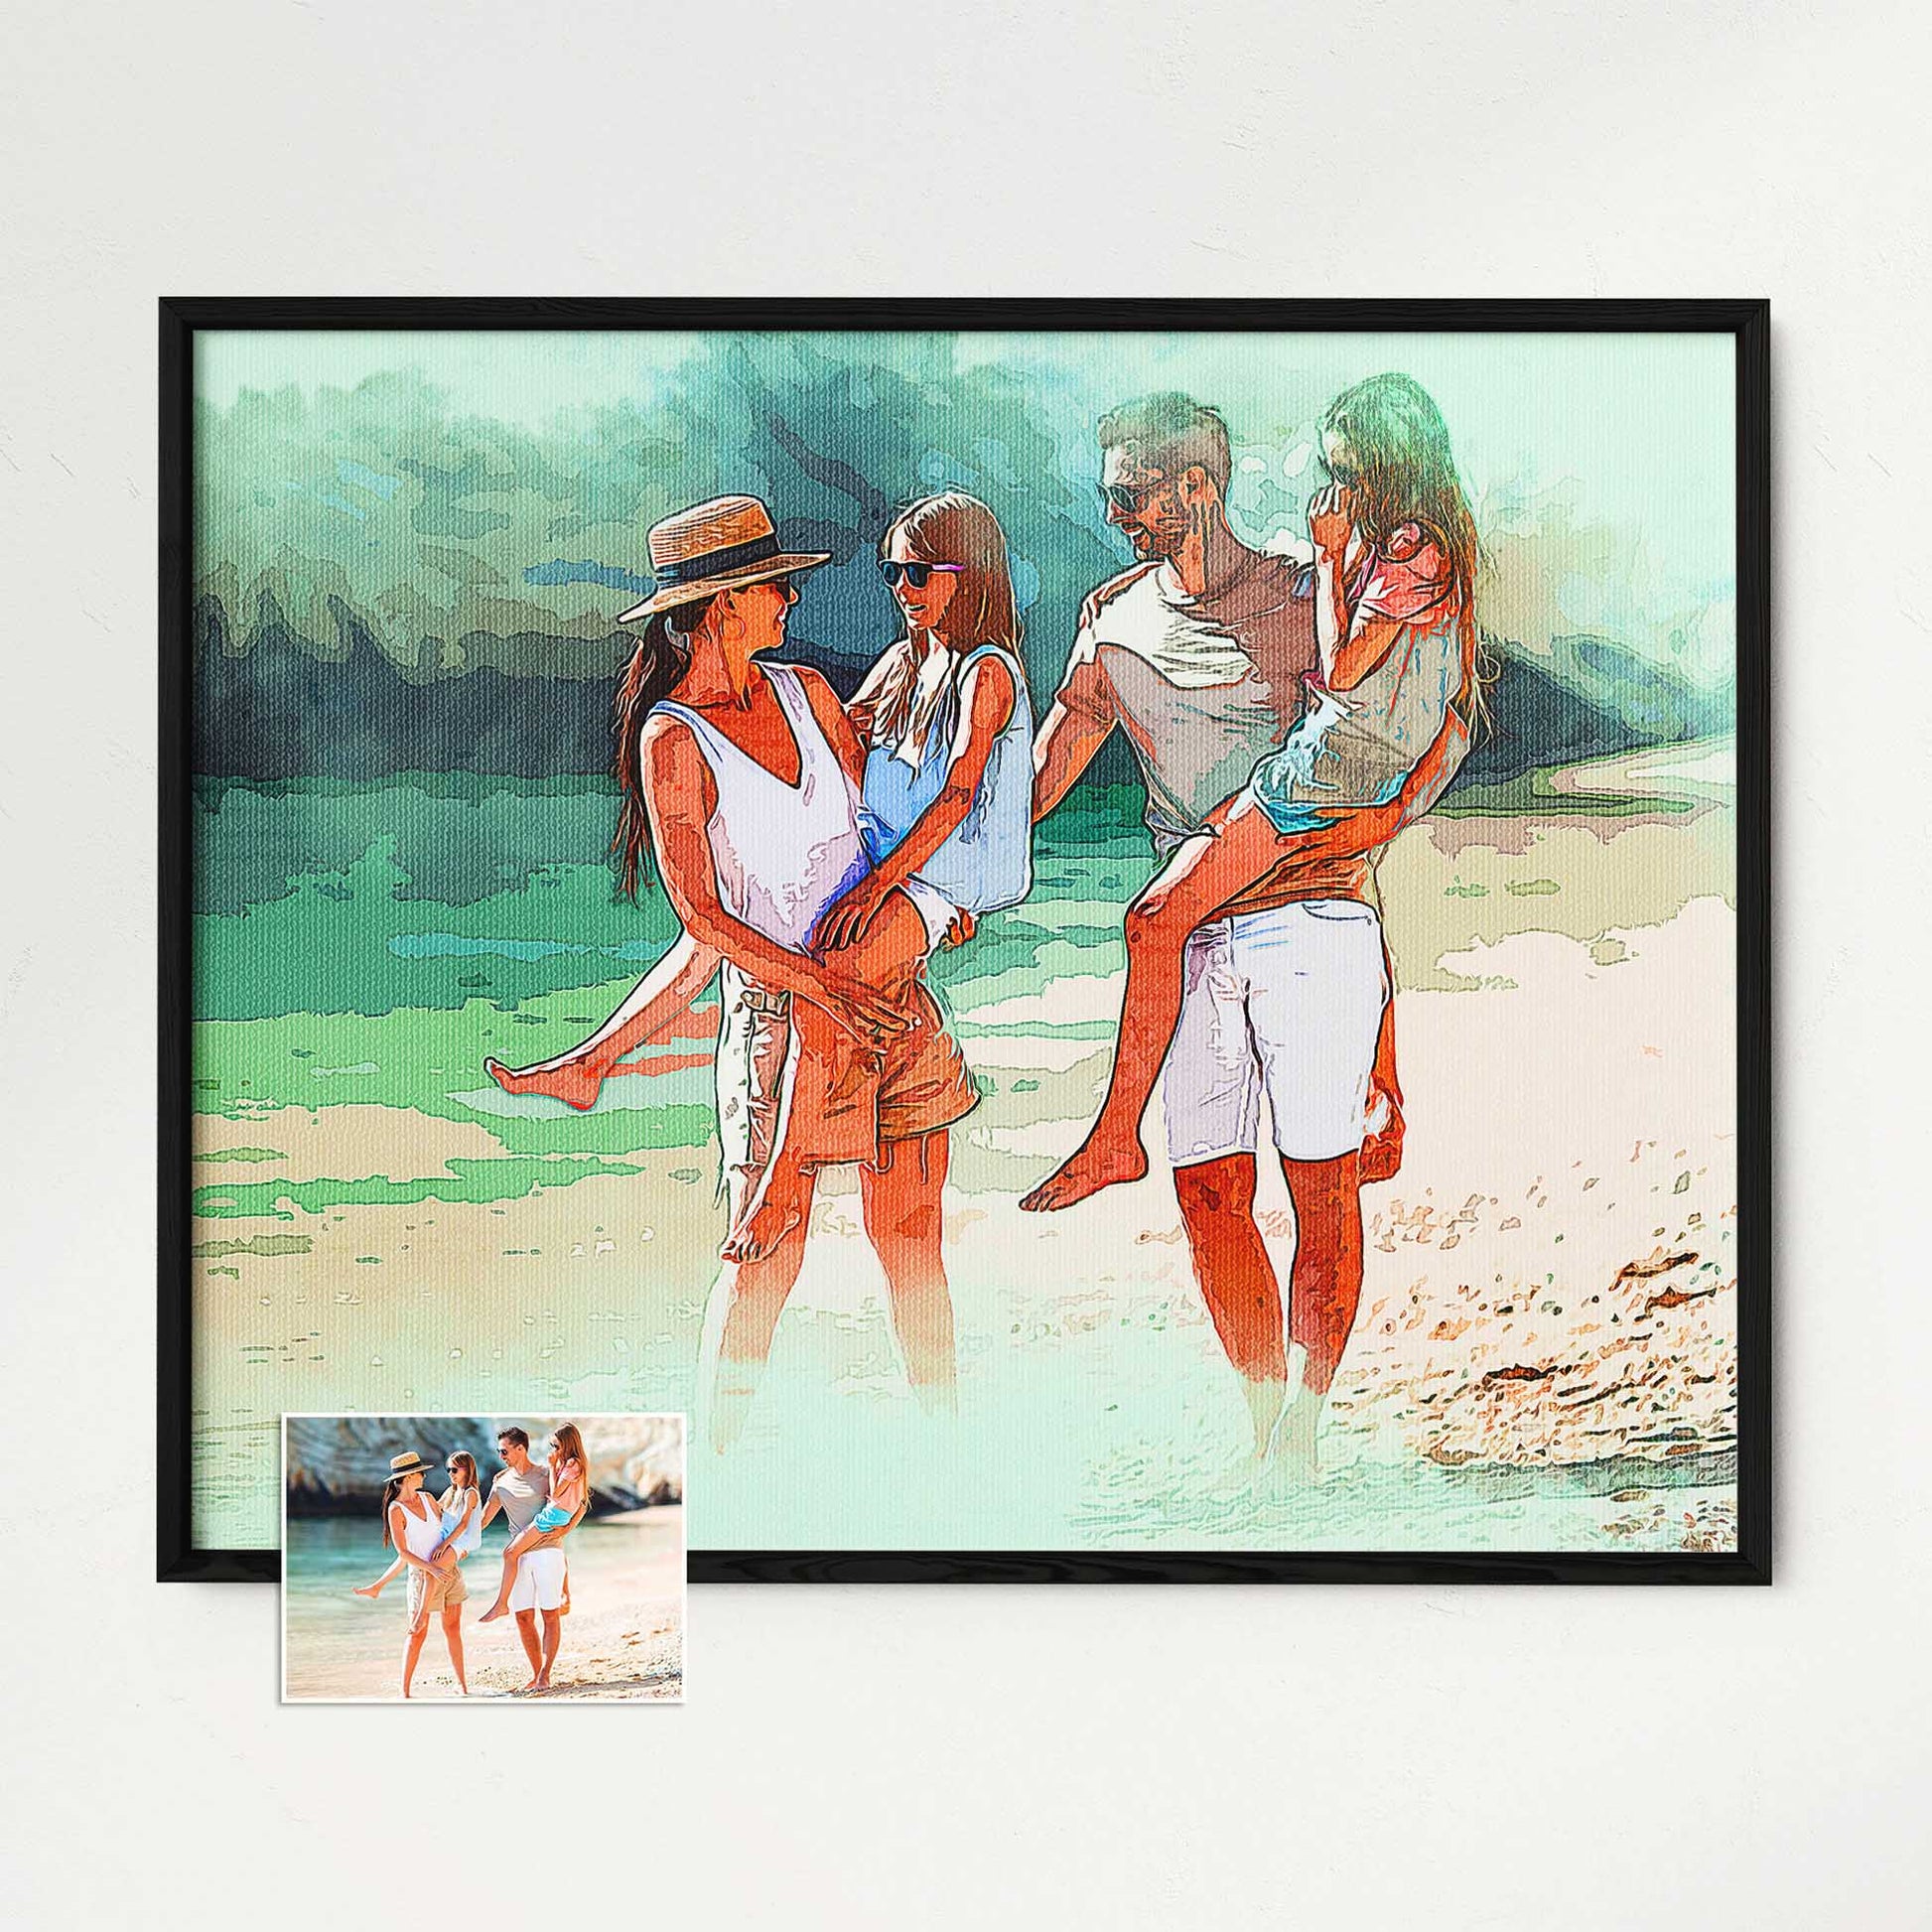 Celebrate the beauty of art with our Personalised Watercolor Texture Framed Print. Created from your photo, this unique artwork is a stunning representation of creativity and imagination. The vibrant and colorful watercolor textures